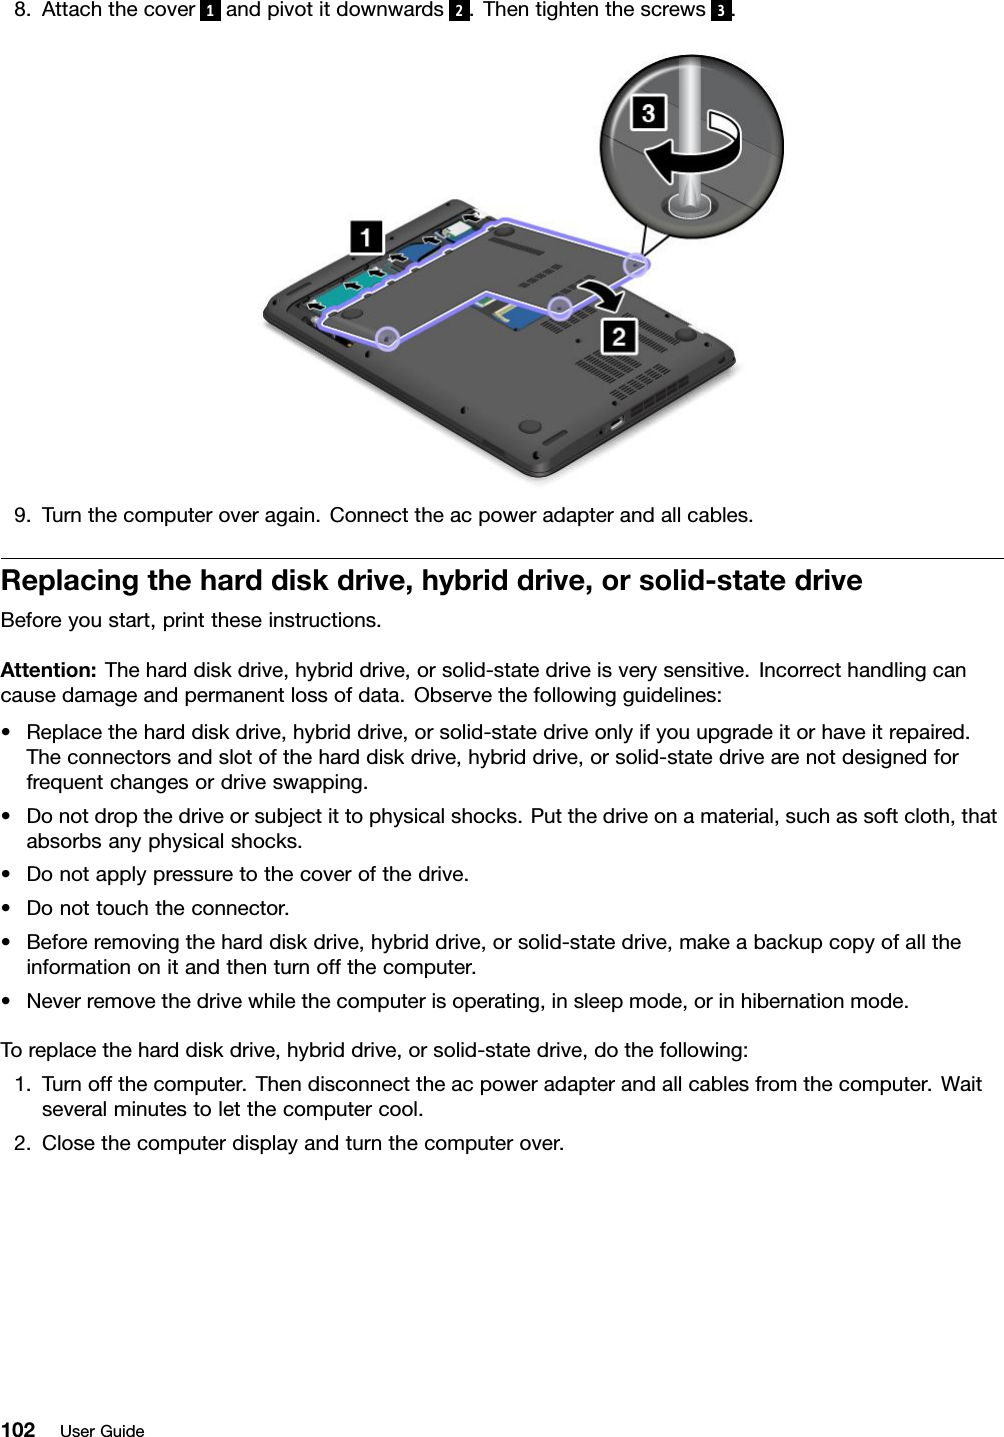 8. Attach the cover 1and pivot it downwards 2. Then tighten the screws 3.9. Turn the computer over again. Connect the ac power adapter and all cables.Replacing the hard disk drive, hybrid drive, or solid-state driveBefore you start, print these instructions.Attention: The hard disk drive, hybrid drive, or solid-state drive is very sensitive. Incorrect handling cancause damage and permanent loss of data. Observe the following guidelines:• Replace the hard disk drive, hybrid drive, or solid-state drive only if you upgrade it or have it repaired.The connectors and slot of the hard disk drive, hybrid drive, or solid-state drive are not designed forfrequent changes or drive swapping.• Do not drop the drive or subject it to physical shocks. Put the drive on a material, such as soft cloth, thatabsorbs any physical shocks.• Do not apply pressure to the cover of the drive.• Do not touch the connector.• Before removing the hard disk drive, hybrid drive, or solid-state drive, make a backup copy of all theinformation on it and then turn off the computer.• Never remove the drive while the computer is operating, in sleep mode, or in hibernation mode.To replace the hard disk drive, hybrid drive, or solid-state drive, do the following:1. Turn off the computer. Then disconnect the ac power adapter and all cables from the computer. Waitseveral minutes to let the computer cool.2. Close the computer display and turn the computer over.102 User Guide